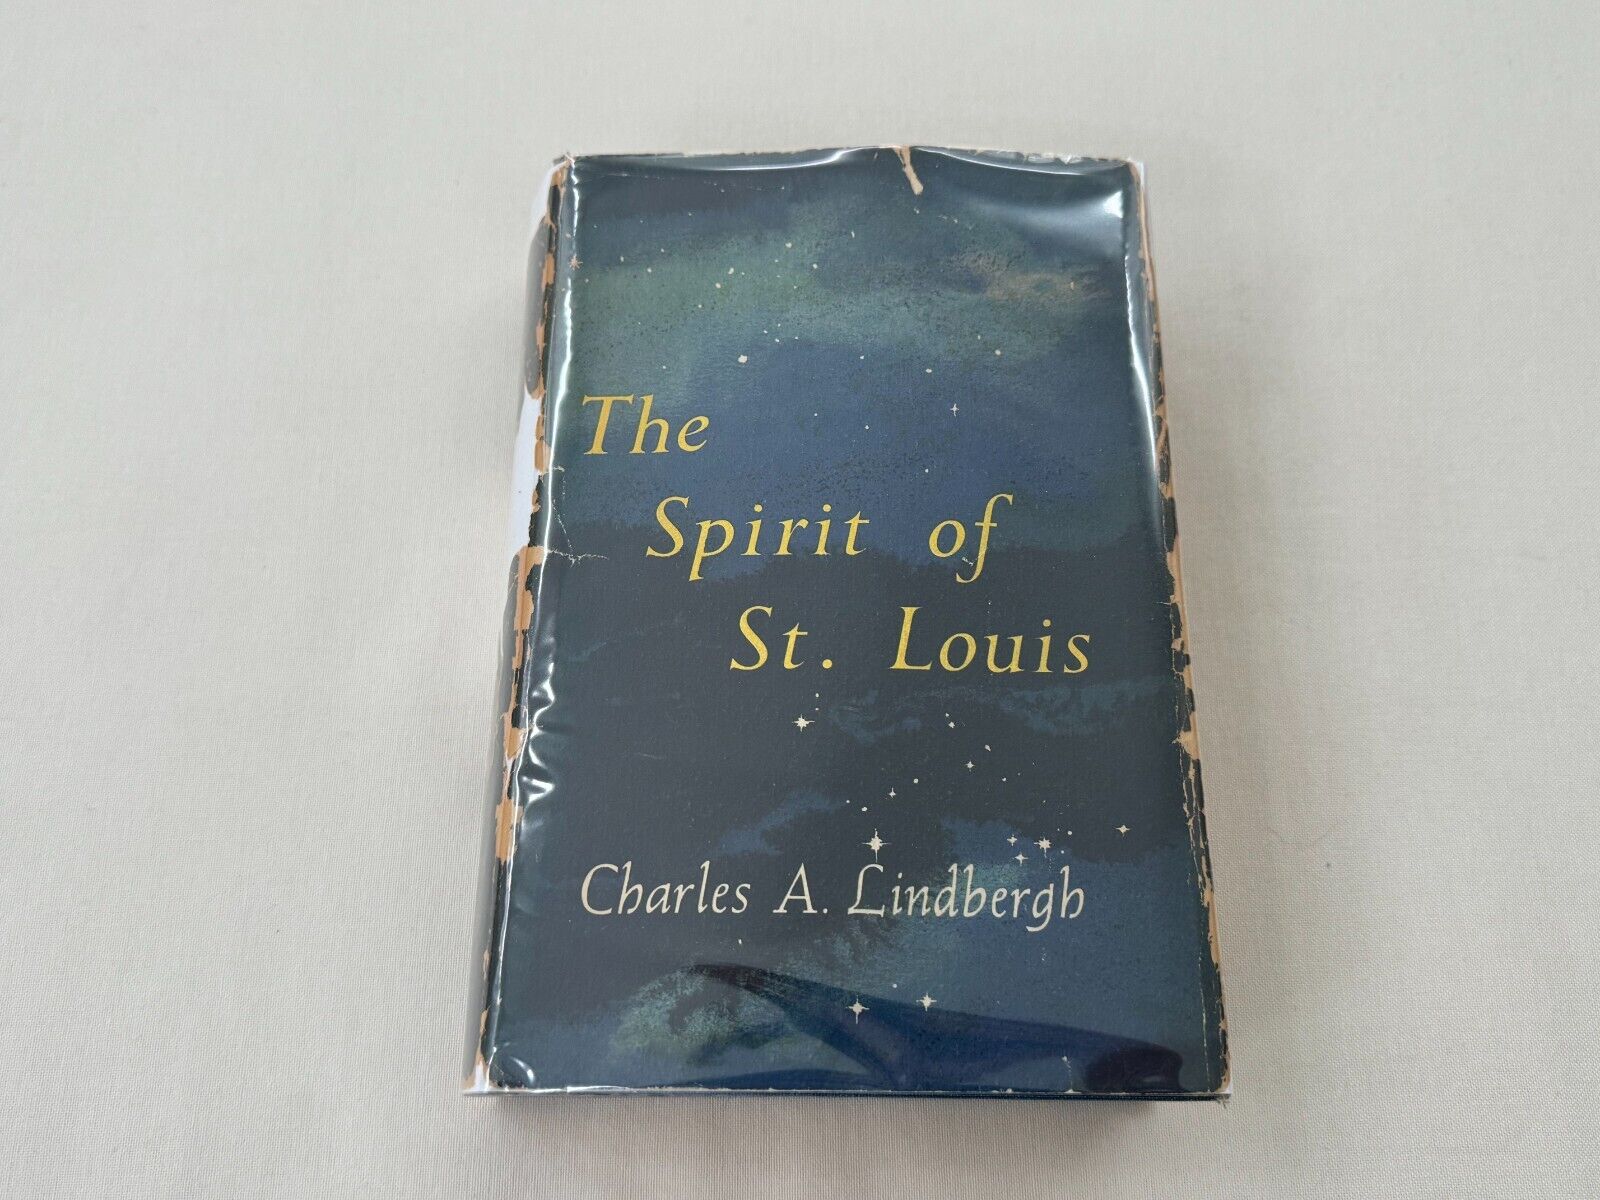 Charles A. Lindbergh, The Spirit Of St. Louis, HC Scribners, 1953, 1ST Edition